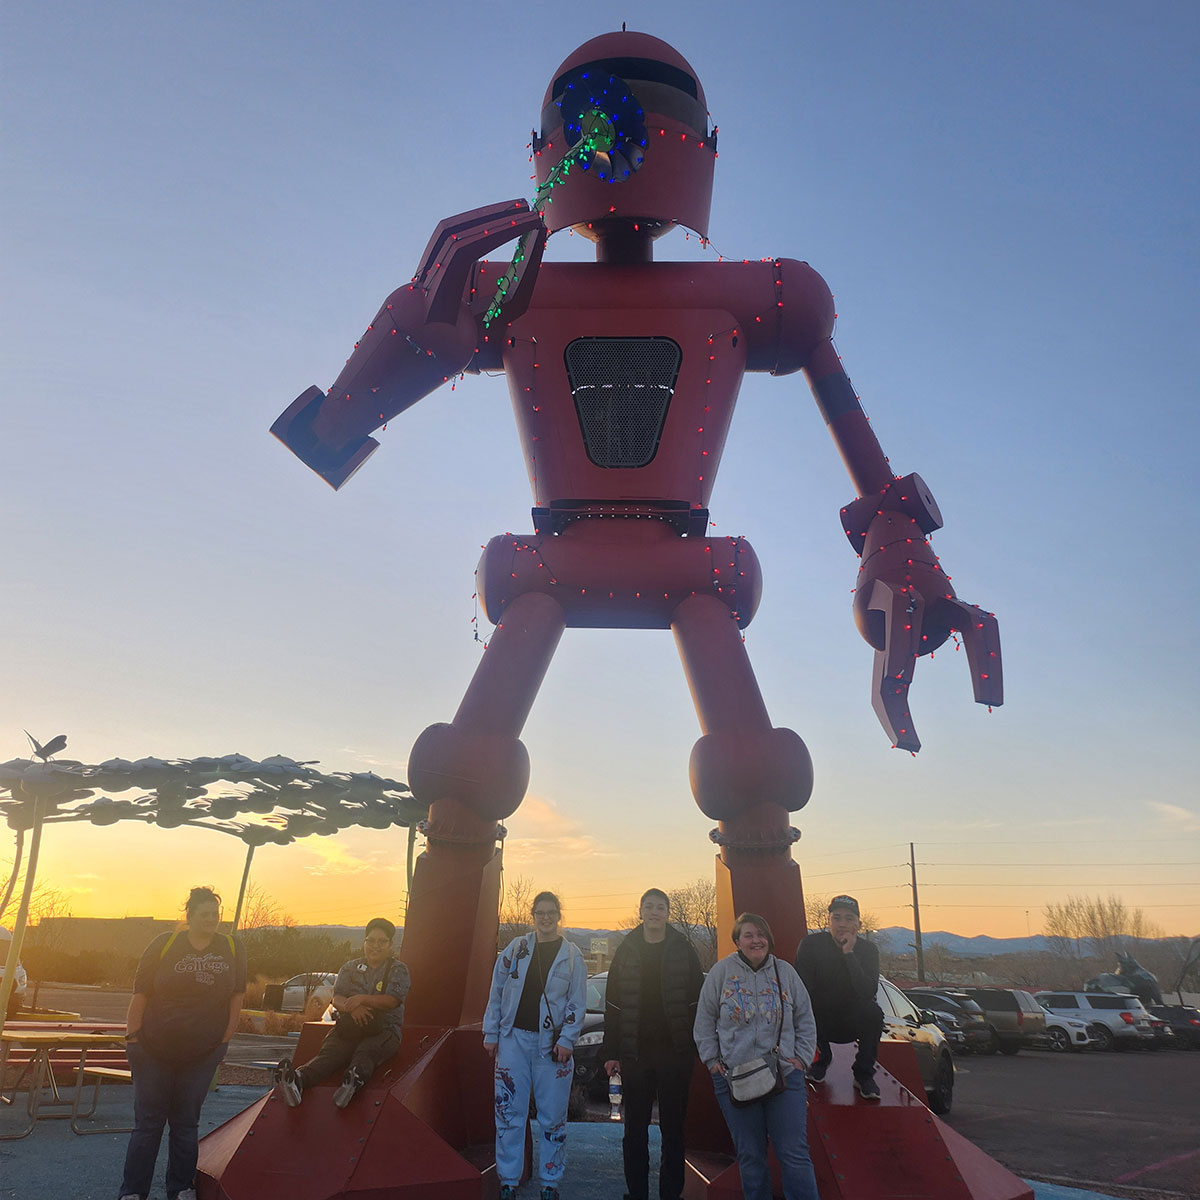 TRIO Students at Meow Wolf in front of a large red robot statue